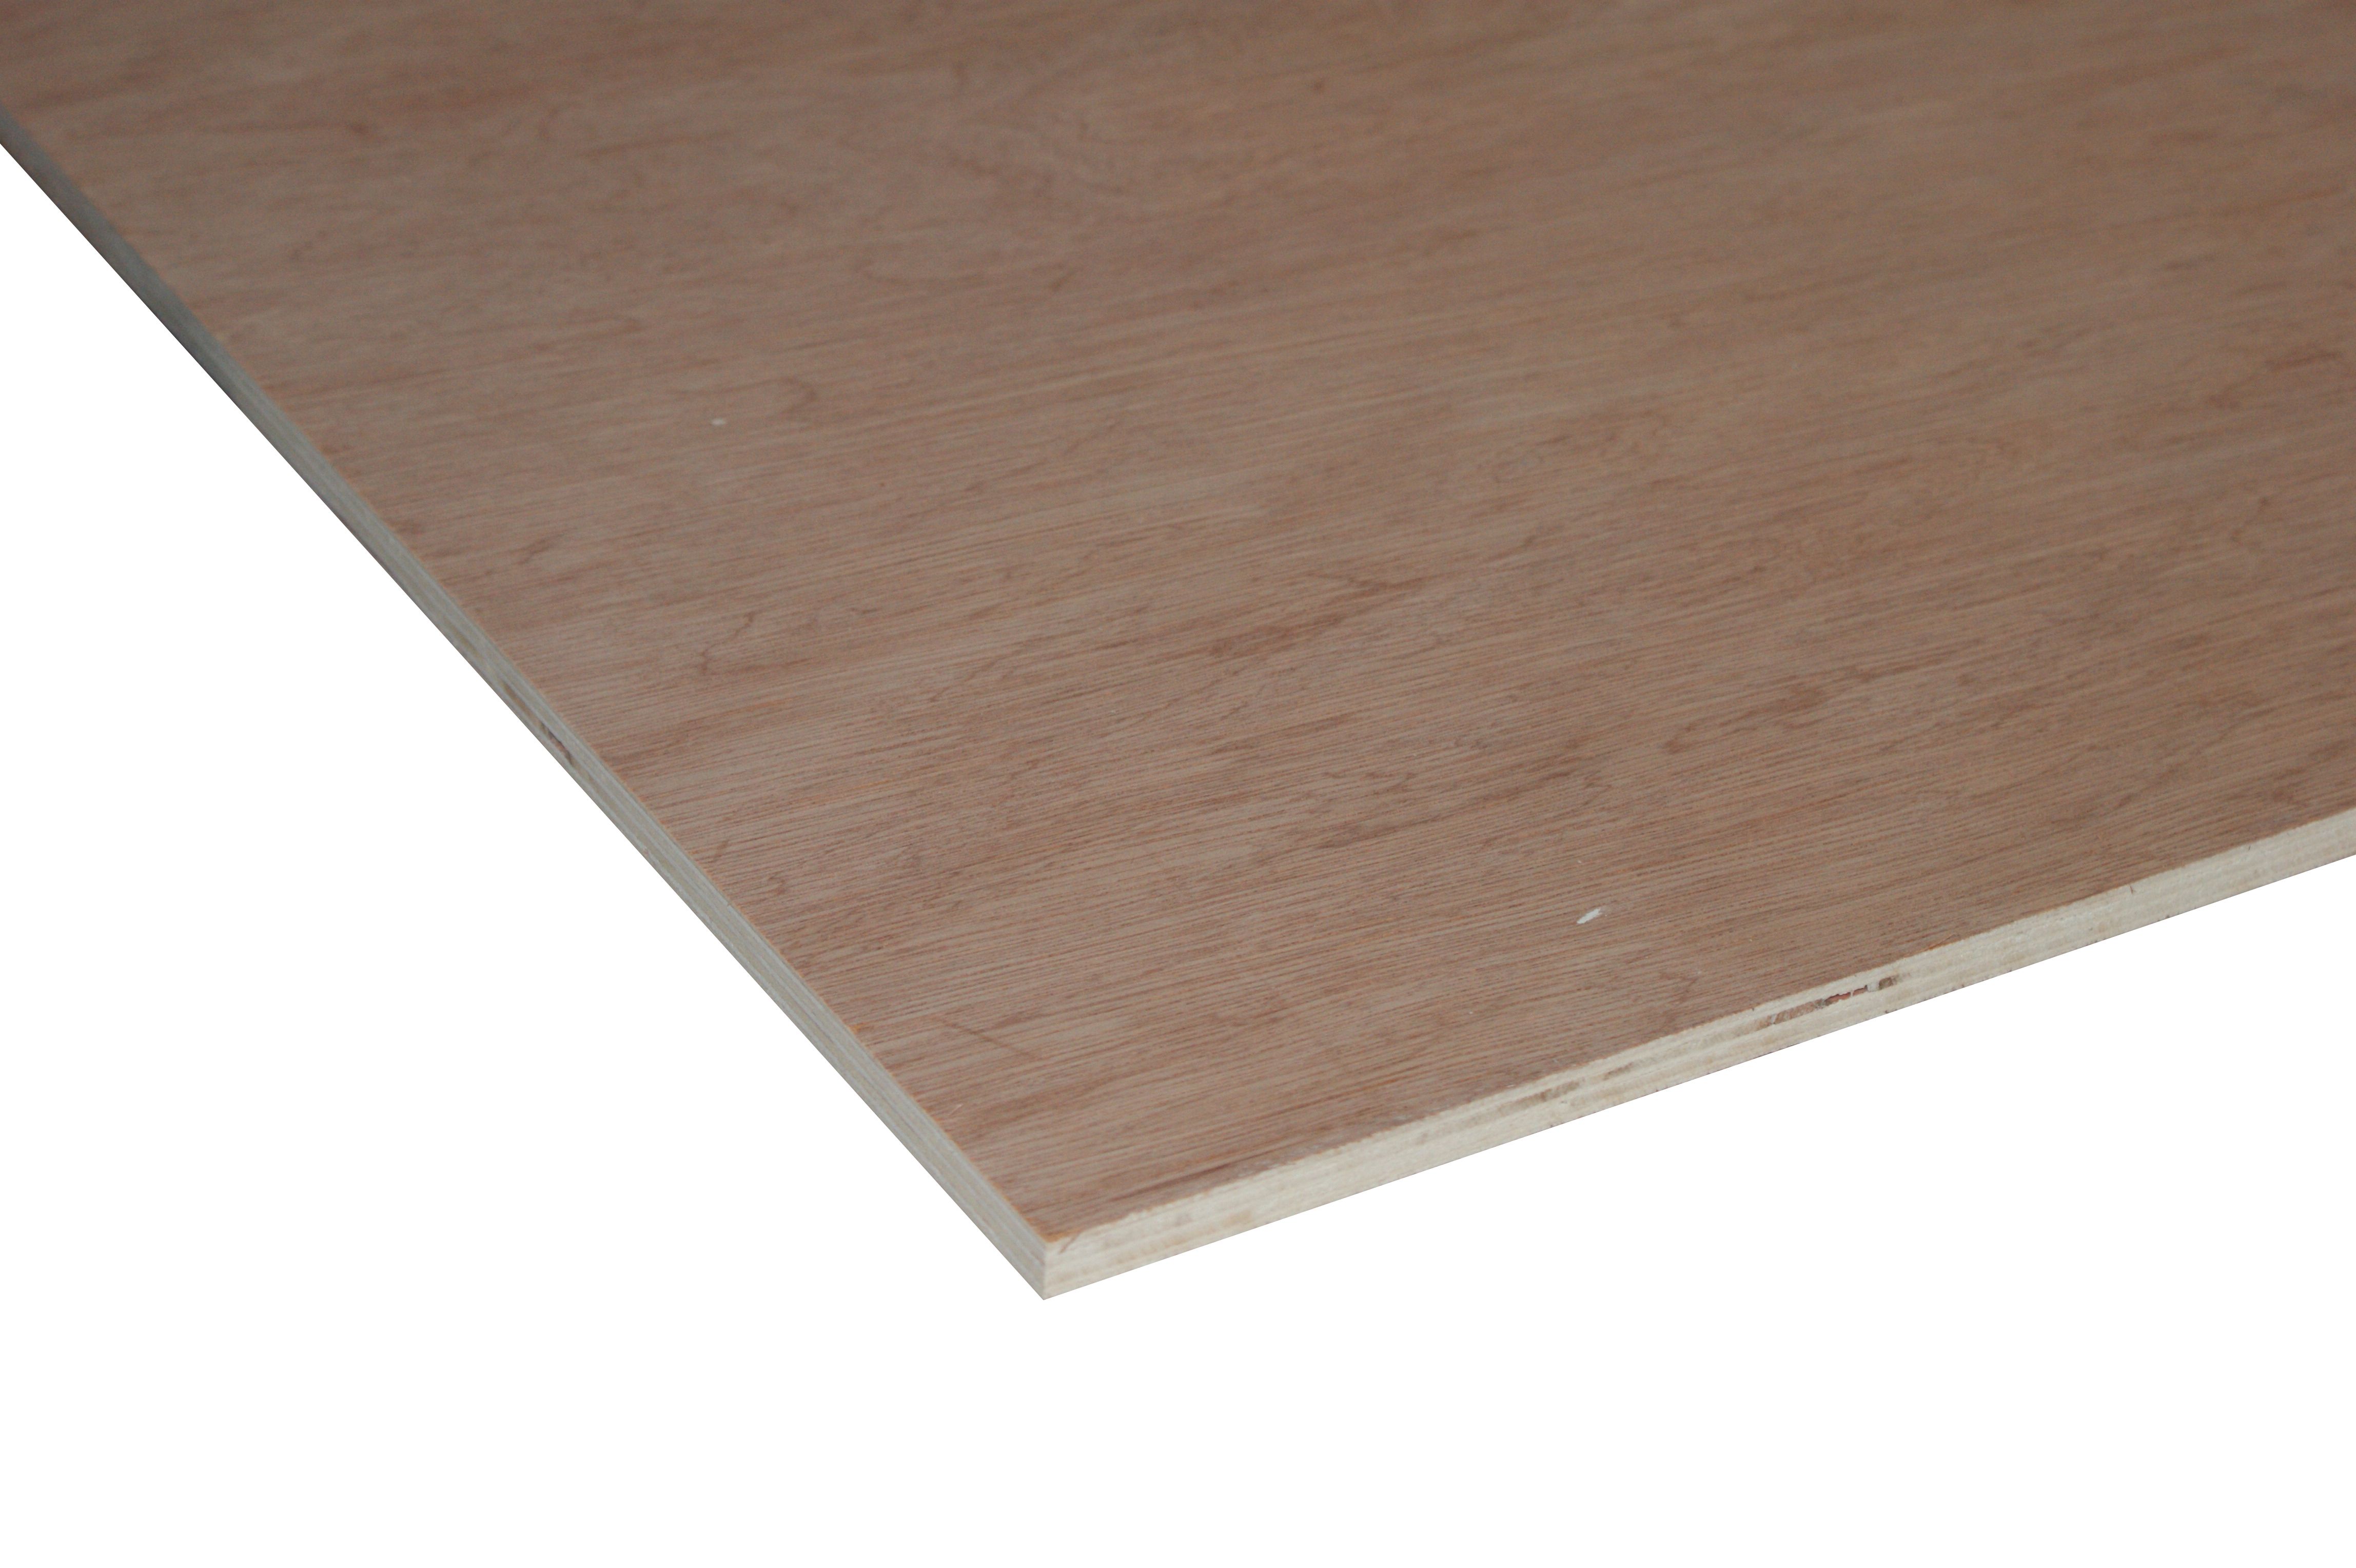 Image of Wickes Non-Structural Hardwood Plywood - 12 x 1220 x 2440mm